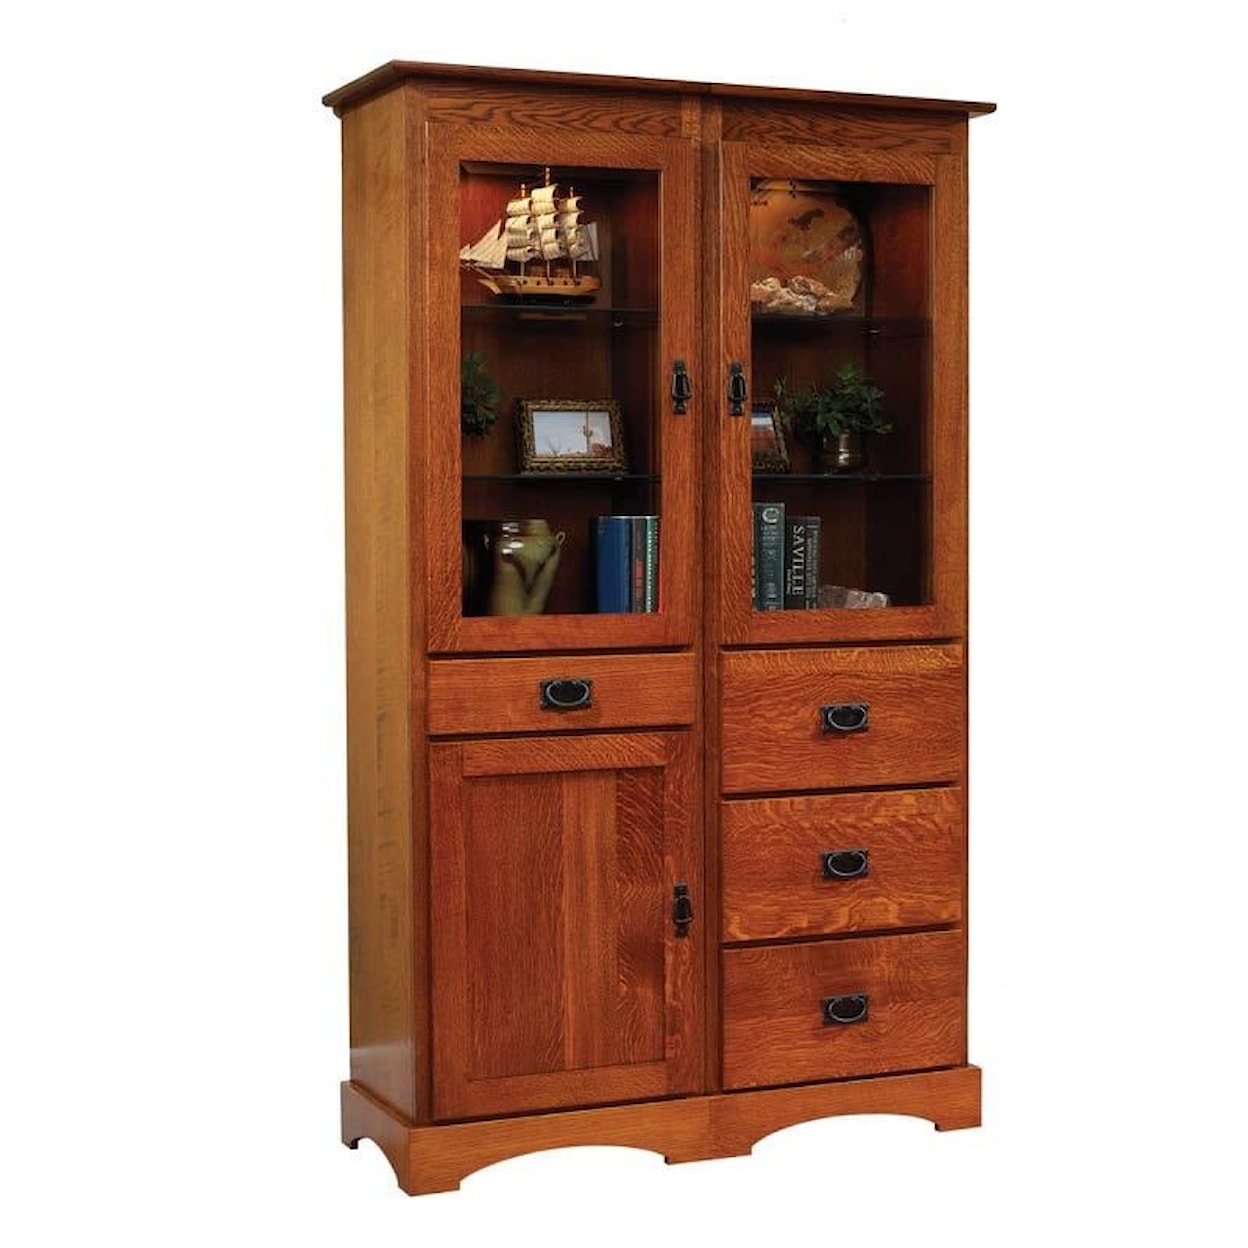 Millcraft Murphy Bed English Mission 23" Bookcase